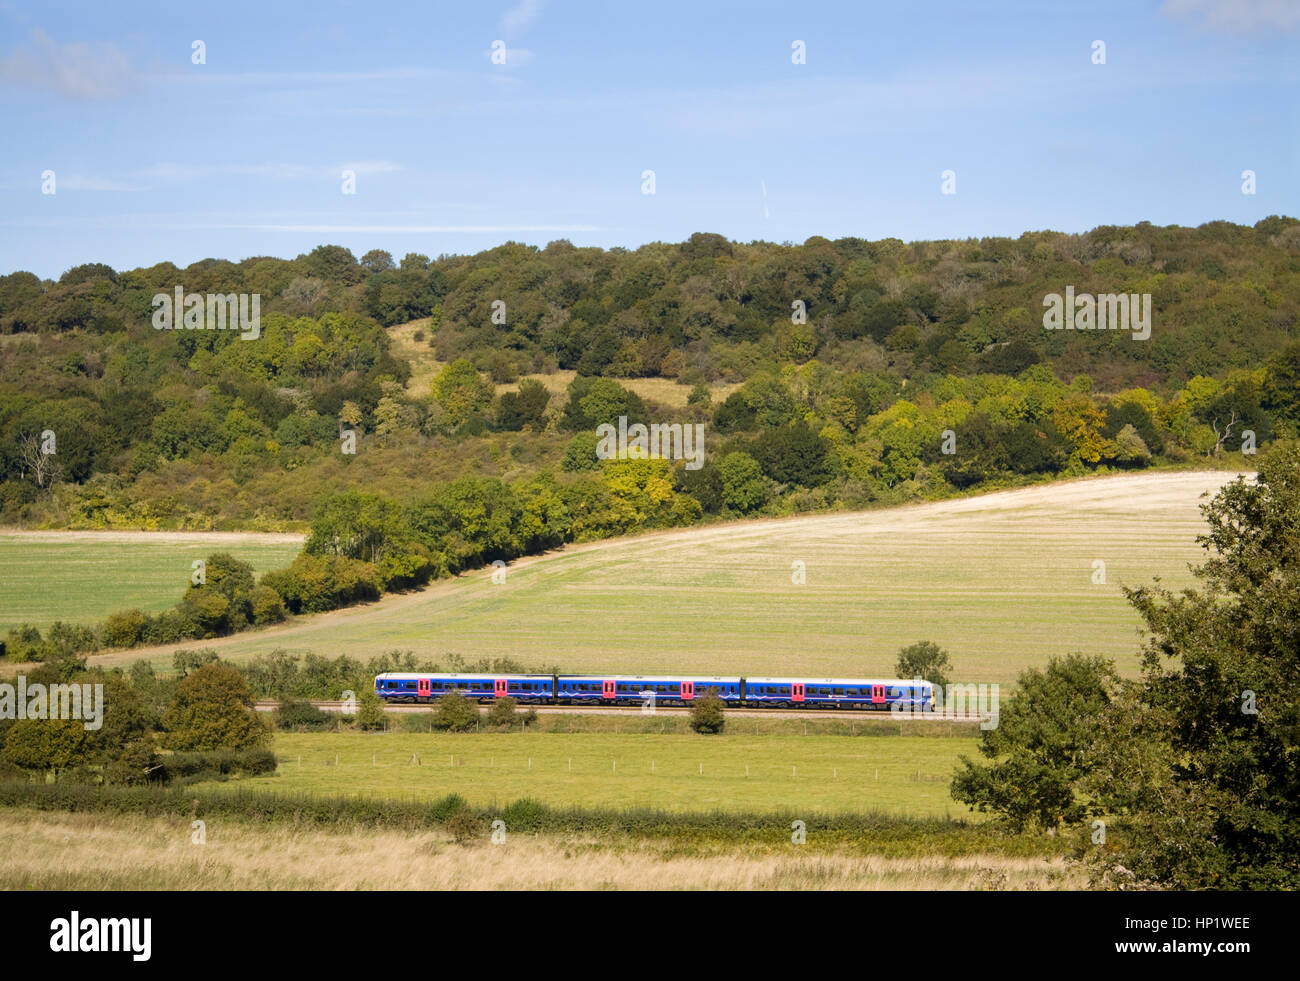 ABINGER HAMMER, SURREY, ENGLAND - SEPTEMBER 29TH 2009 - A Class 166 Turbo Express diesel multiple unit operated Great Western Railway. Stock Photo